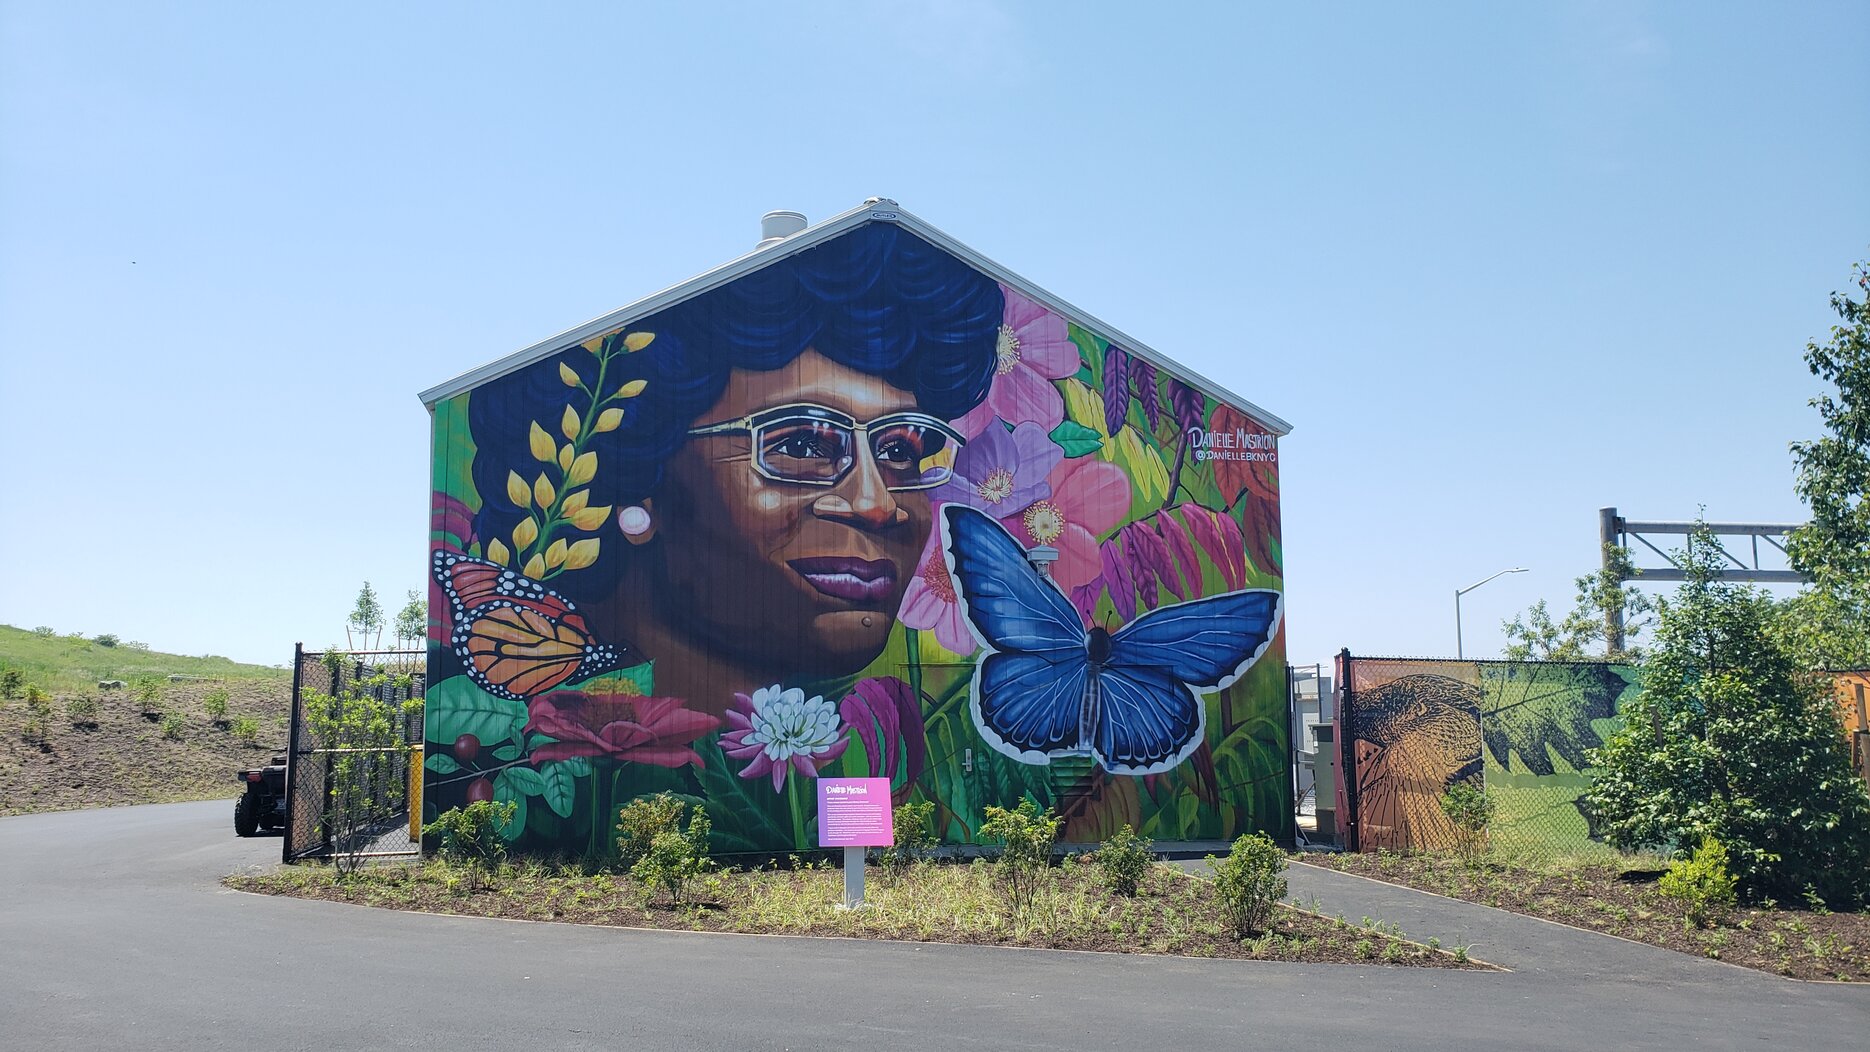 Shirley Chisholm State Park offers a variety of habitat including grasslands, tidal creeks, marsh, and beach. Mural art by Danielle Mastrion. Photo: Akilah Lewis